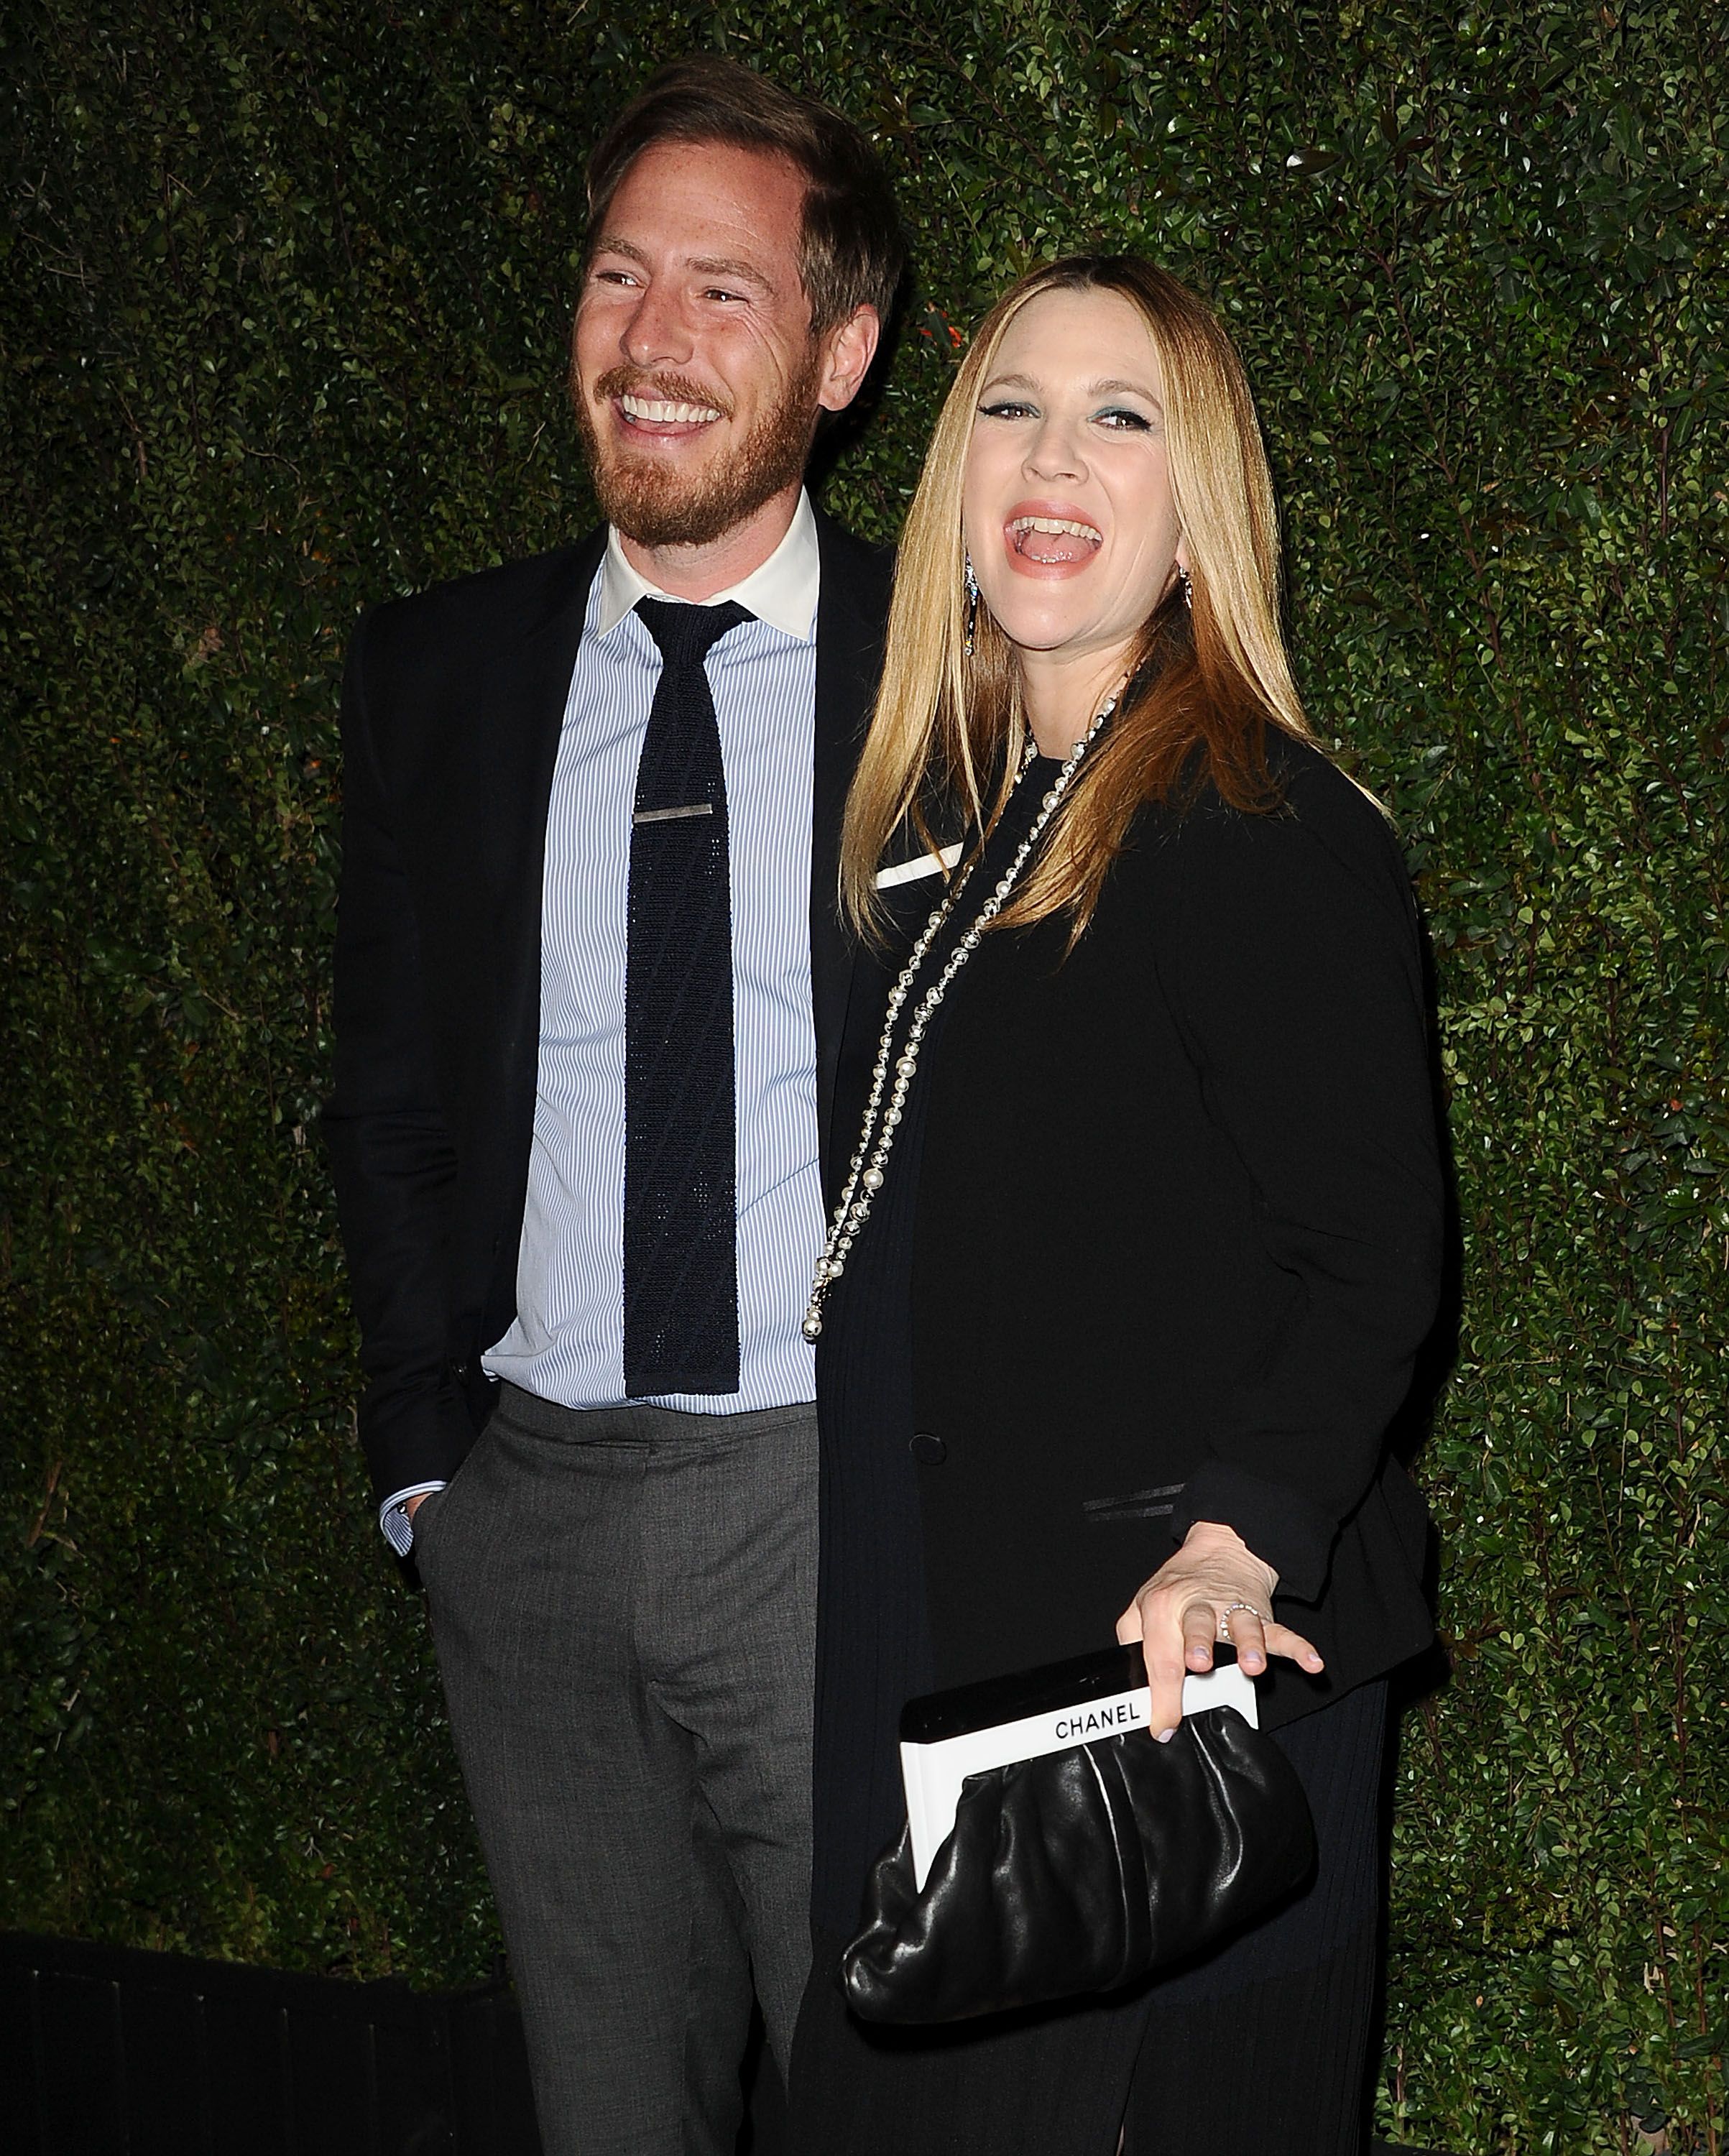 Drew Barrymore and Will Kopelman at the release of "Find It in Anything" in Beverly Hills on January 14, 2014 |Photo: Getty Images 